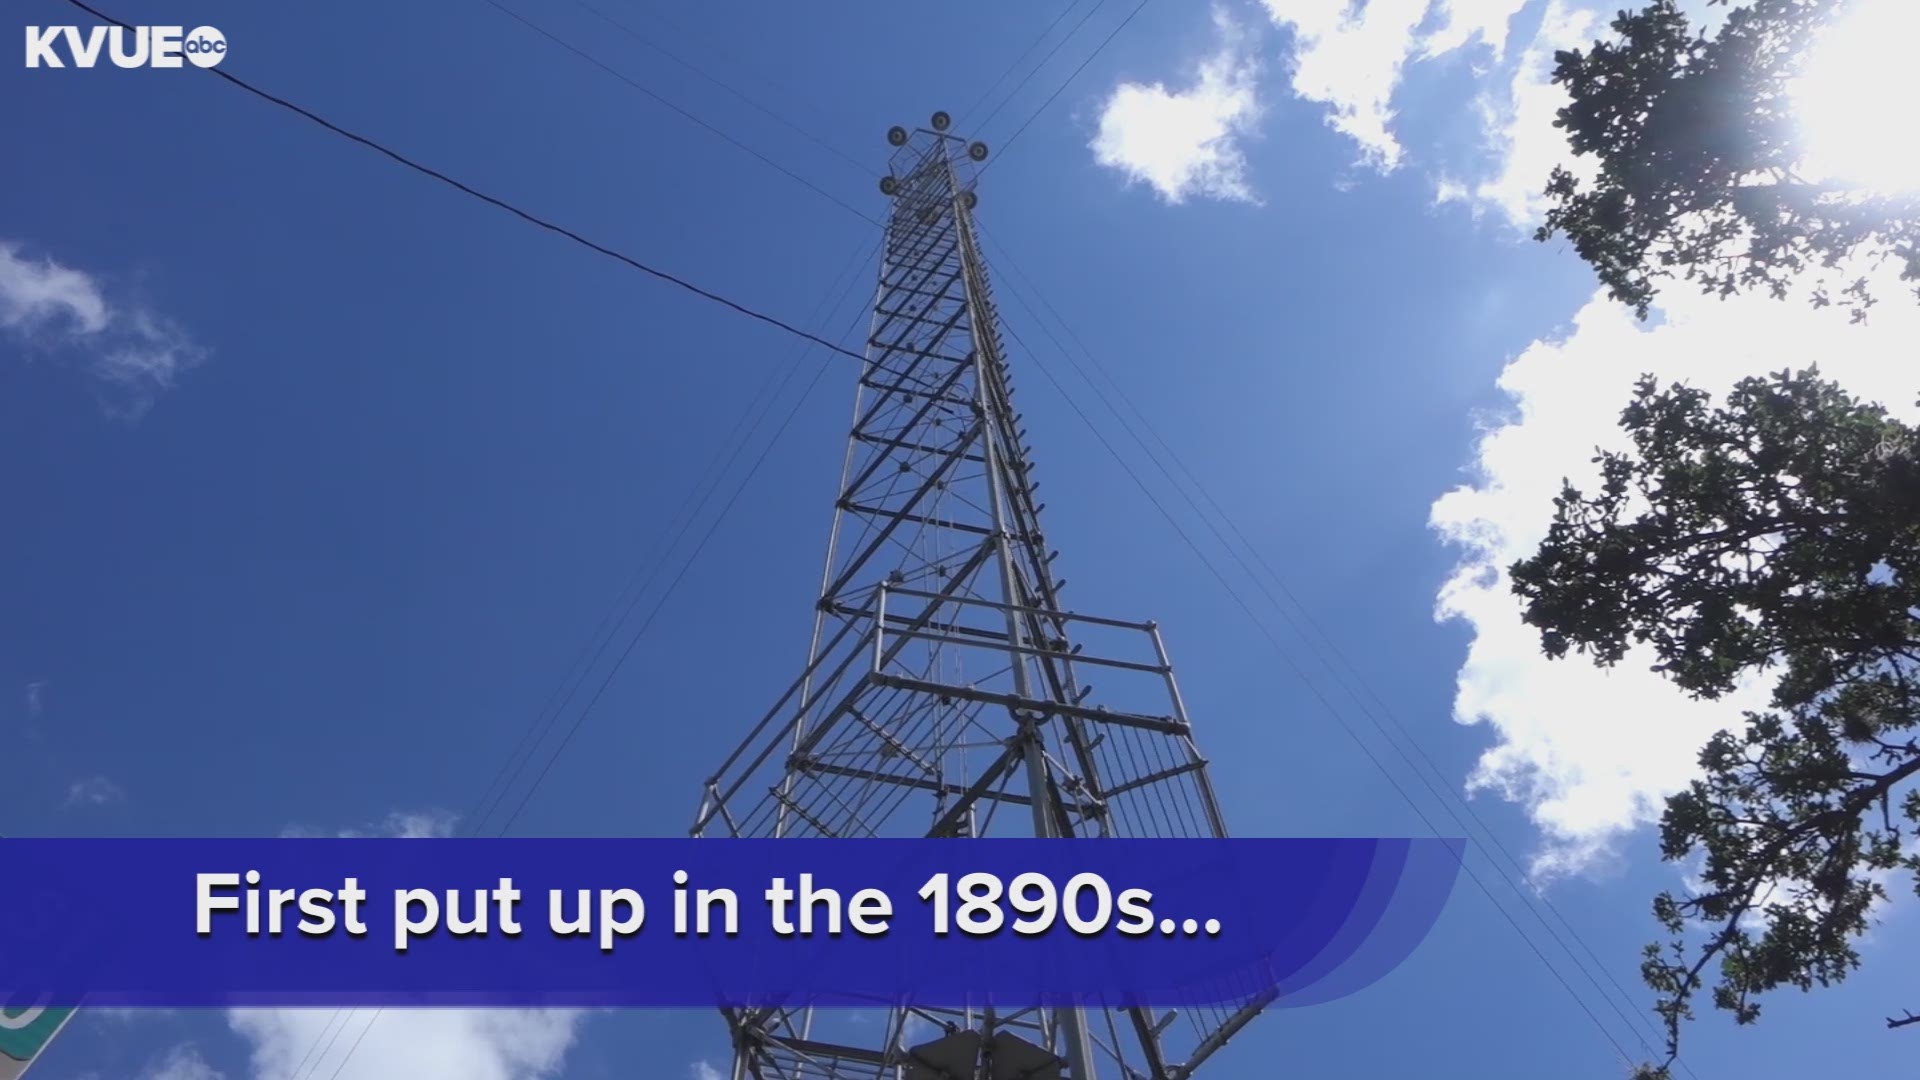 In 1894, Austin's first moonlight tower was lit in Hyde Park.